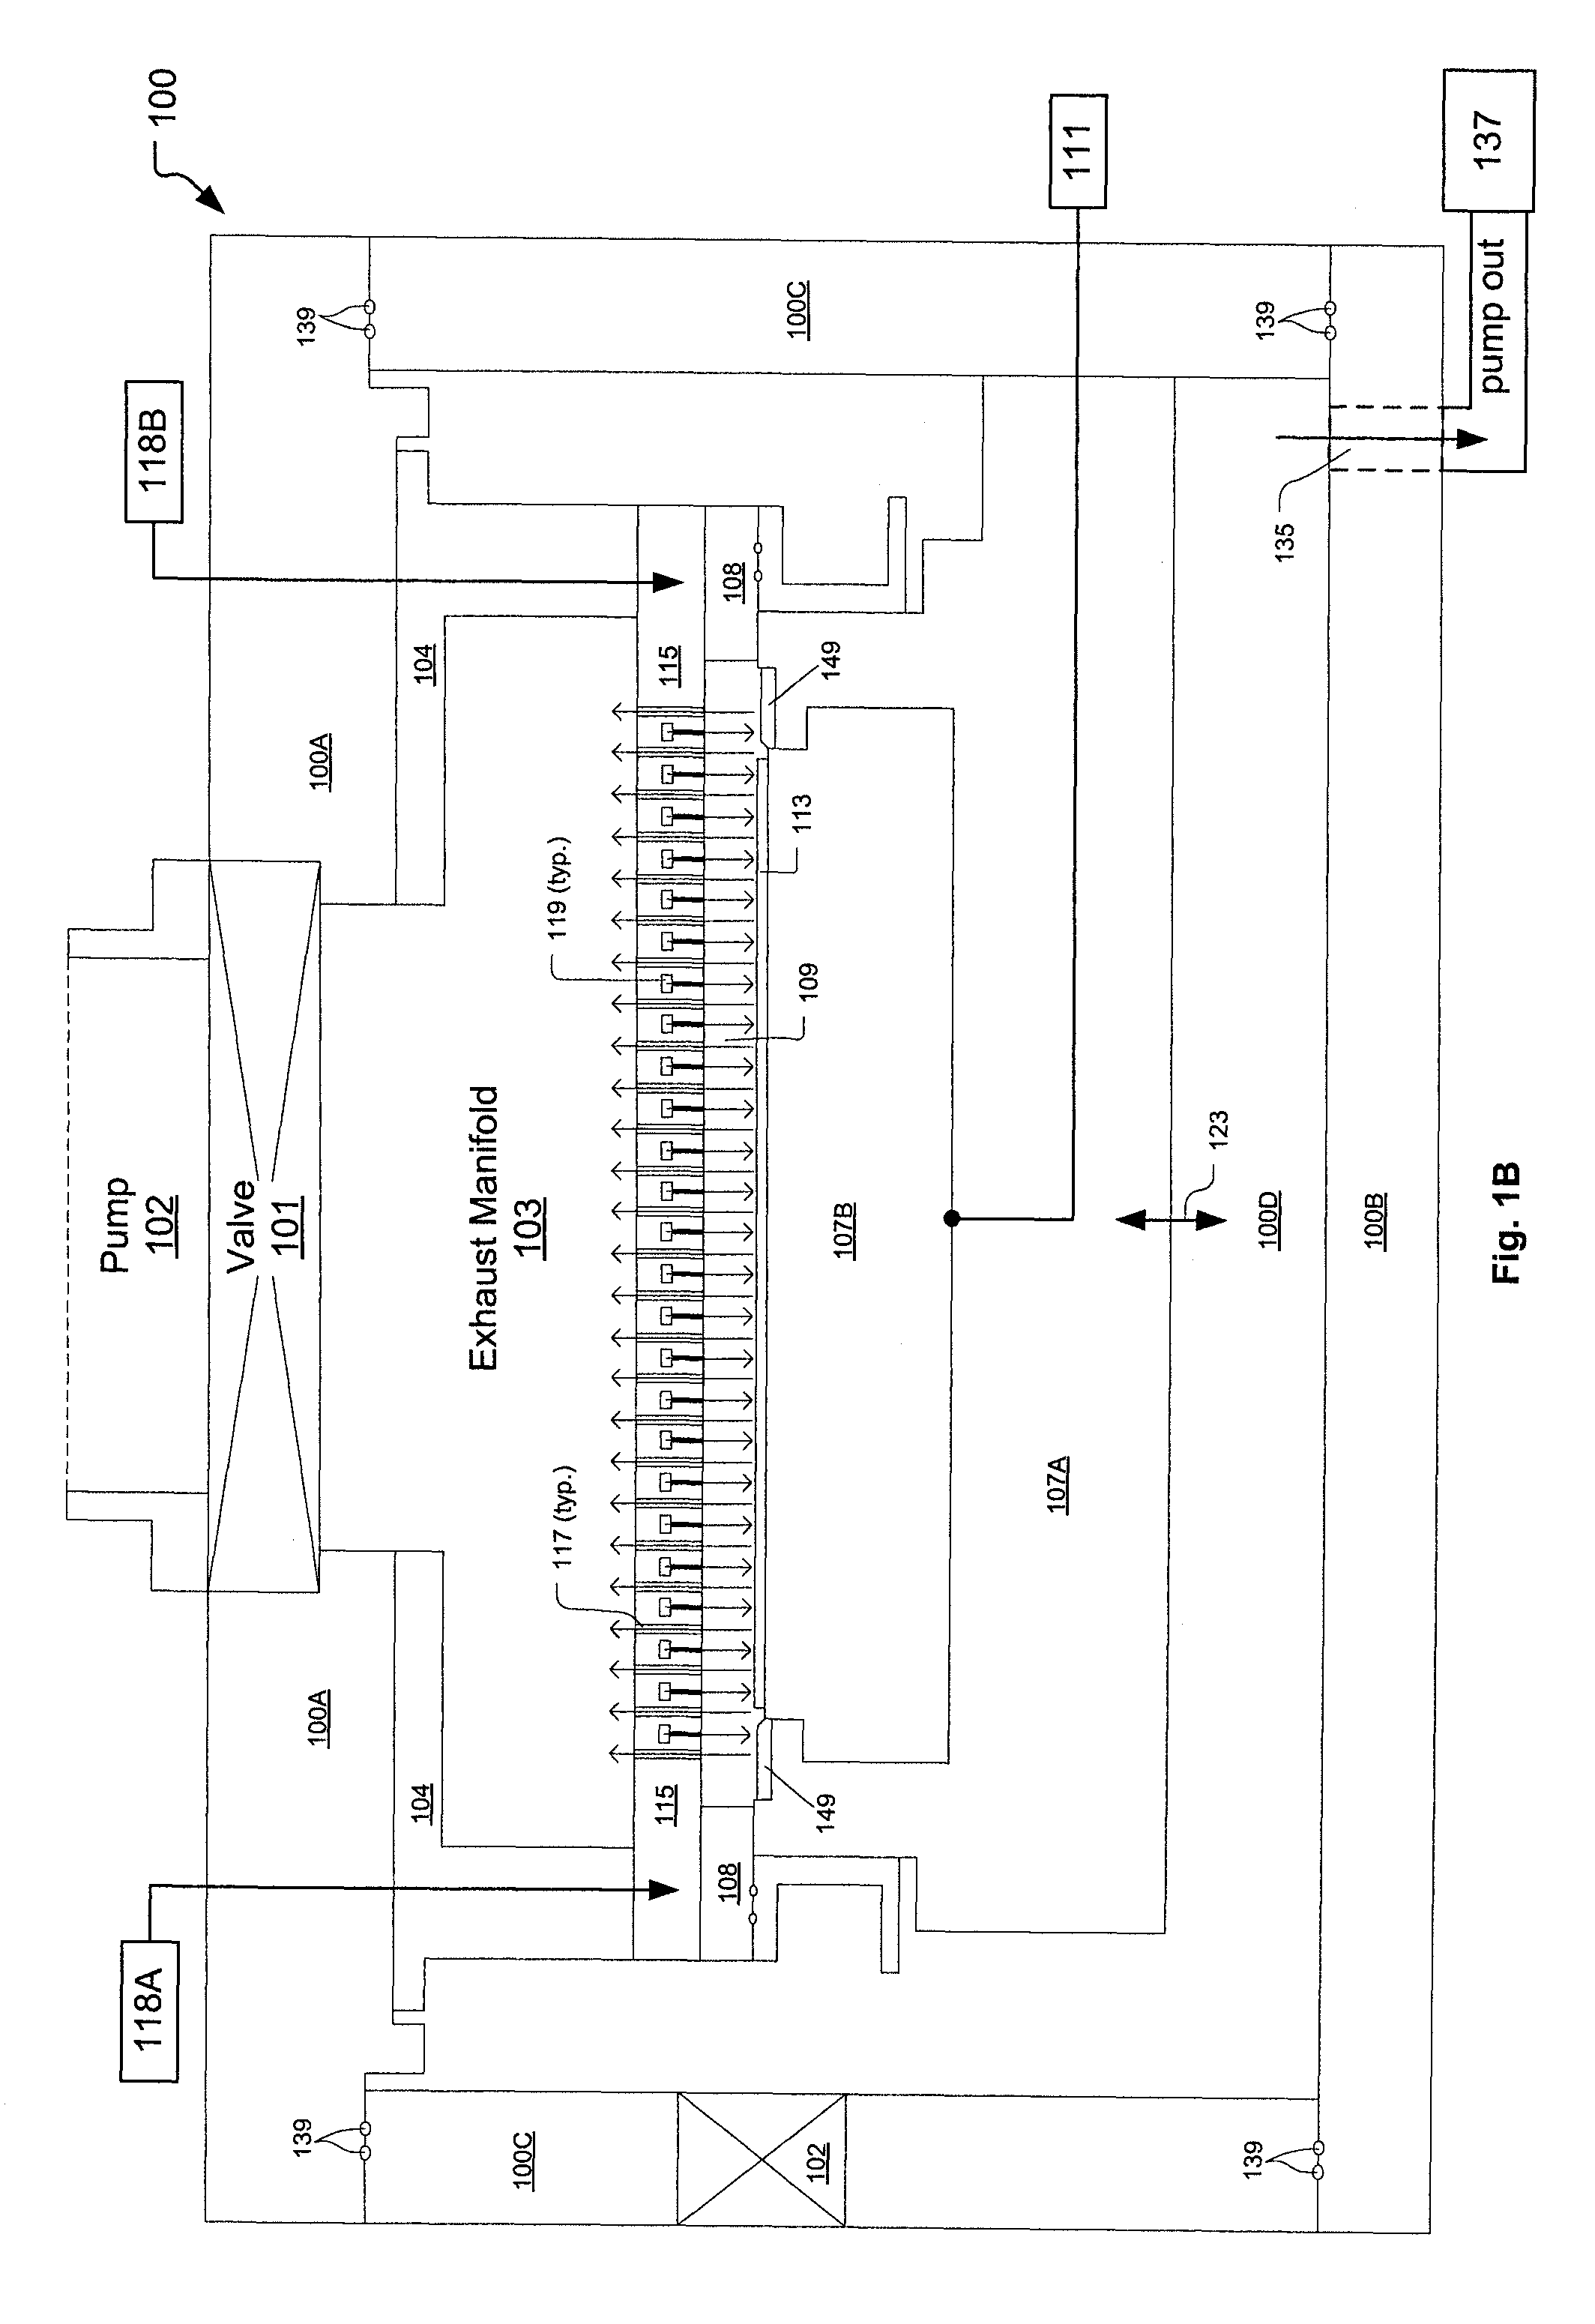 Plasma processing chamber with dual axial gas injection and exhaust